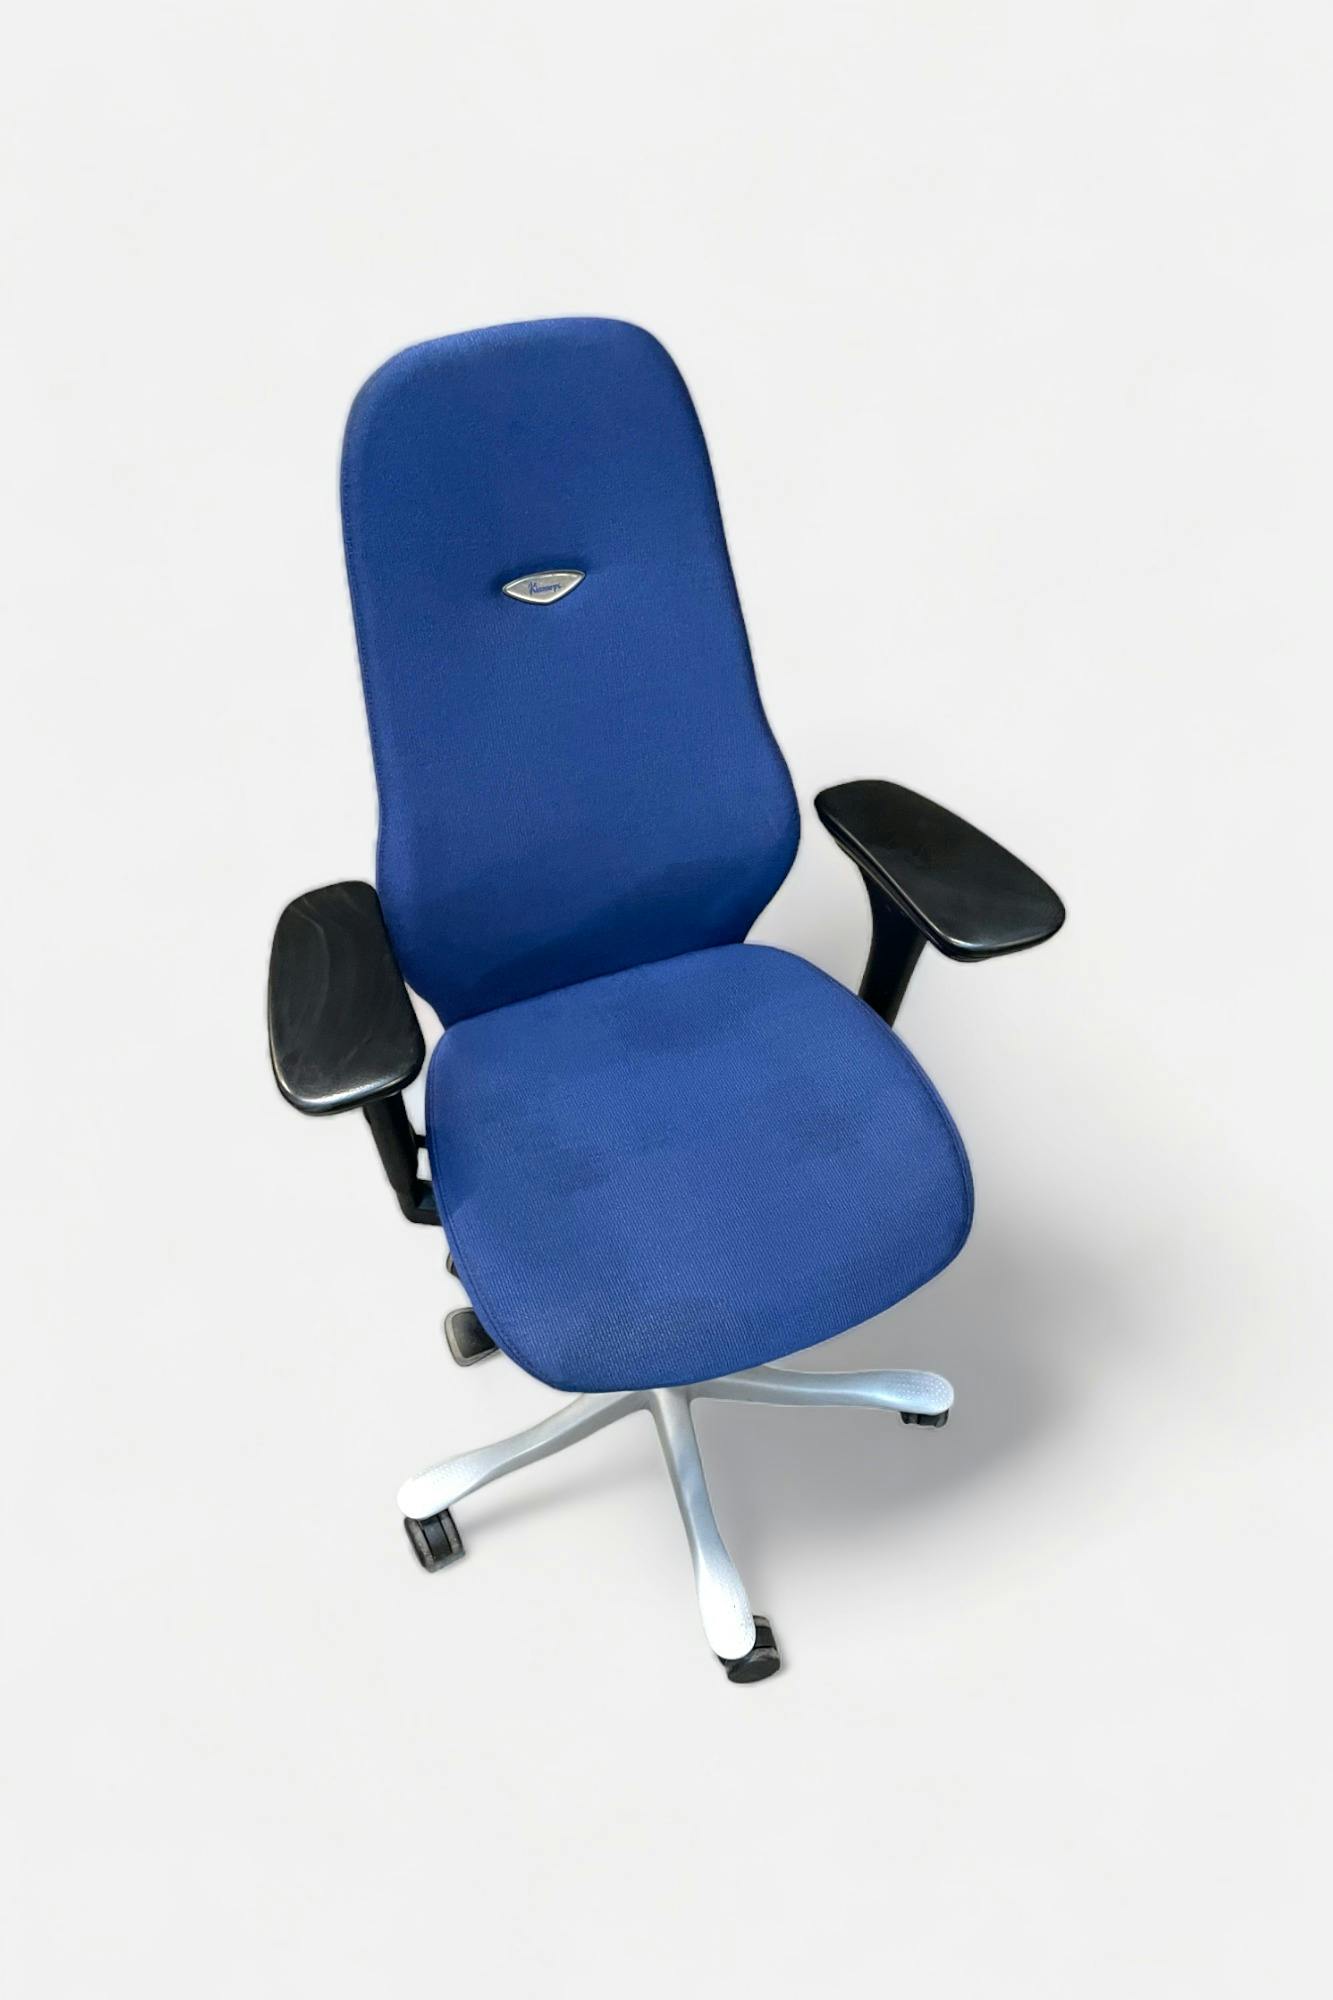 Blue office chair Kinnarps 8000 - Relieve Furniture